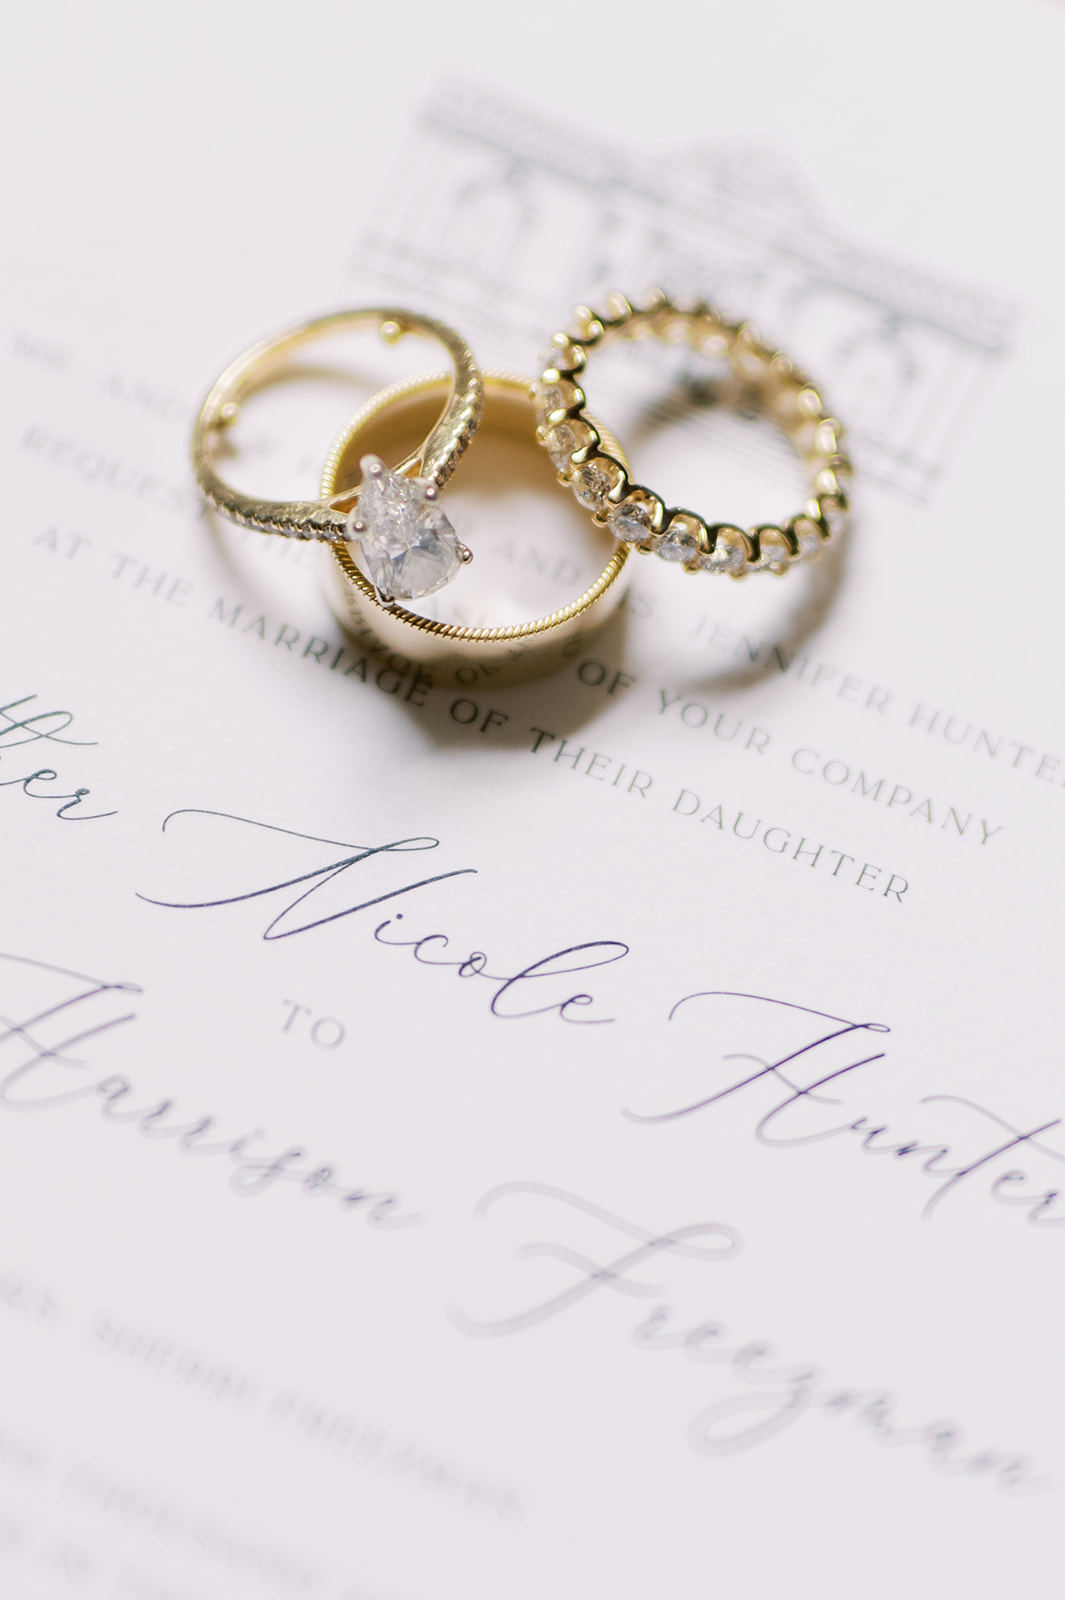 Engagement ring and wedding bands laid on invitation